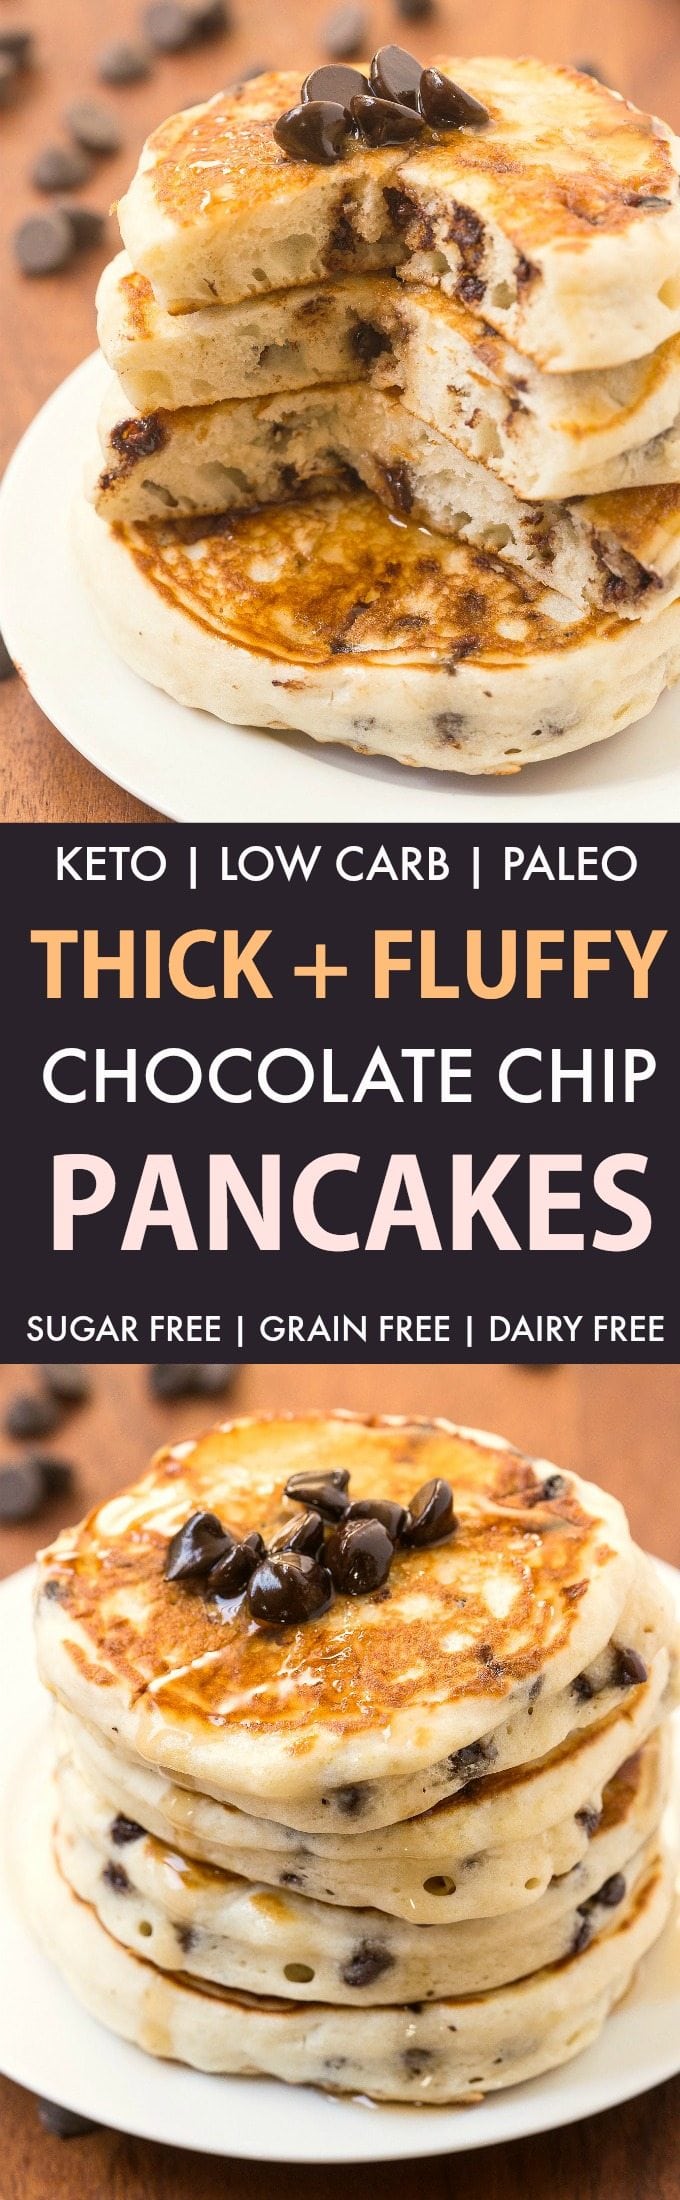 Thick Fluffy Low Carb Chocolate Chip Pancakes (Keto, Paleo, Sugar Free)- Ultra thick and fluffy pancakes suitable for a low carb and ketogenic diet, but you'd never tell! #keto #ketobreakfast #paleopancakes #lowcarbrecipe #lowcarbpancakes | Recipe on thebigmansworld.com